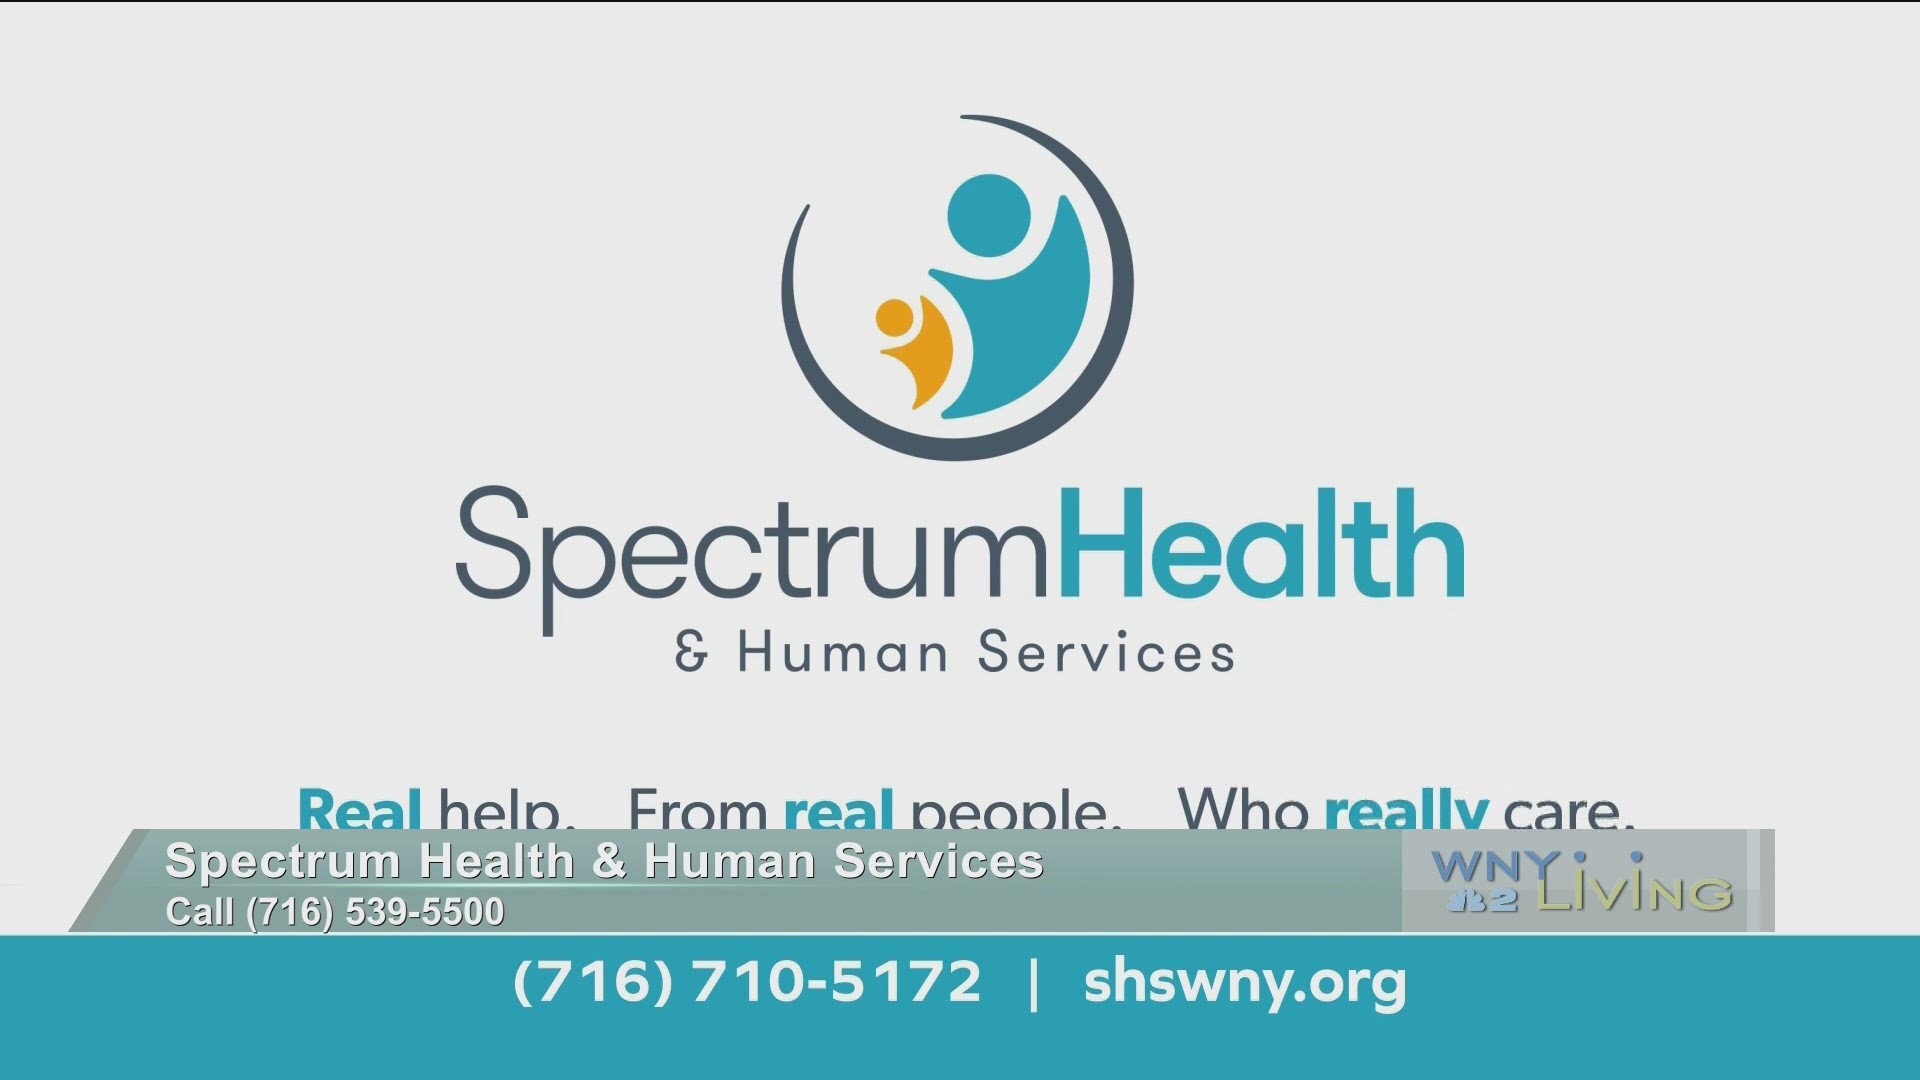 WNY Living - May 15 - Spectrum Health & Human Services (THIS VIDEO IS SPONSORED BY SPECTRUM HEALTH & HUMAN SERVICES)